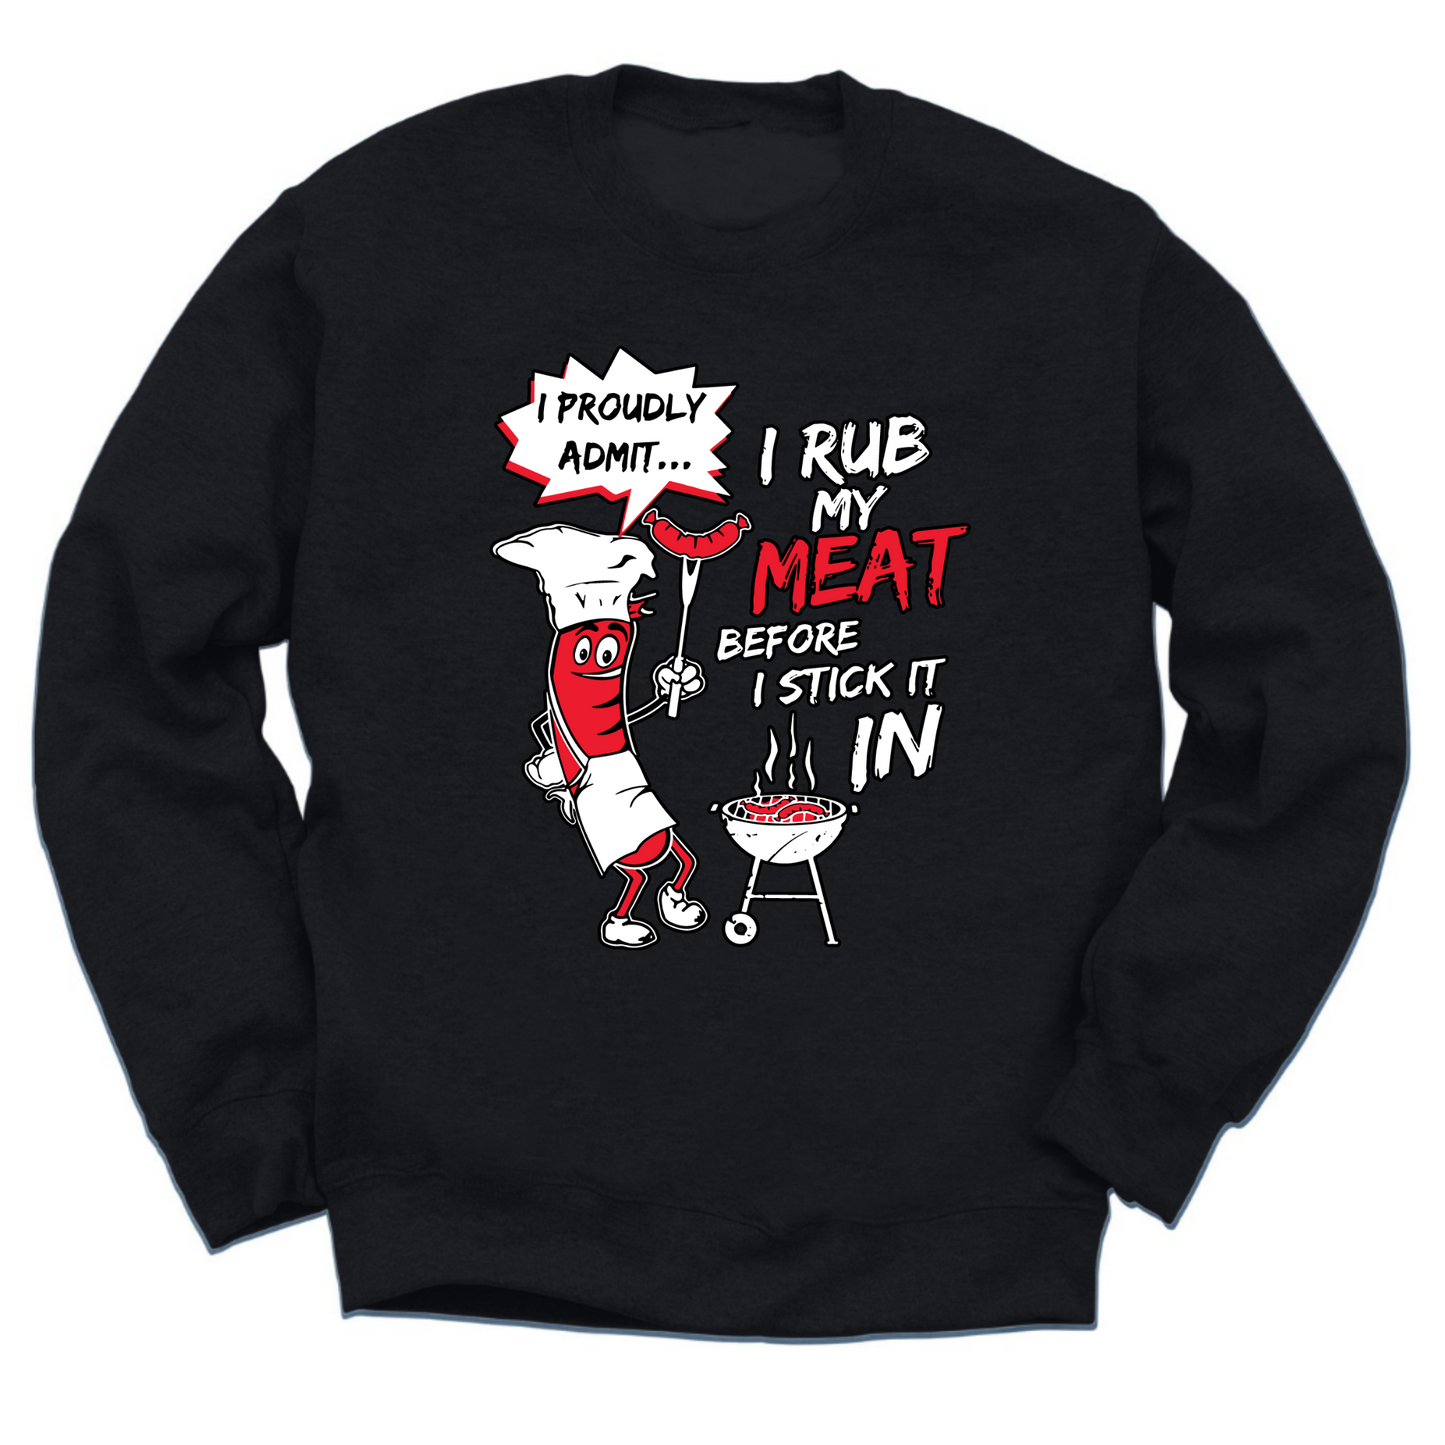 I Rub My Meat Before I Stick It In Crewneck Sweater